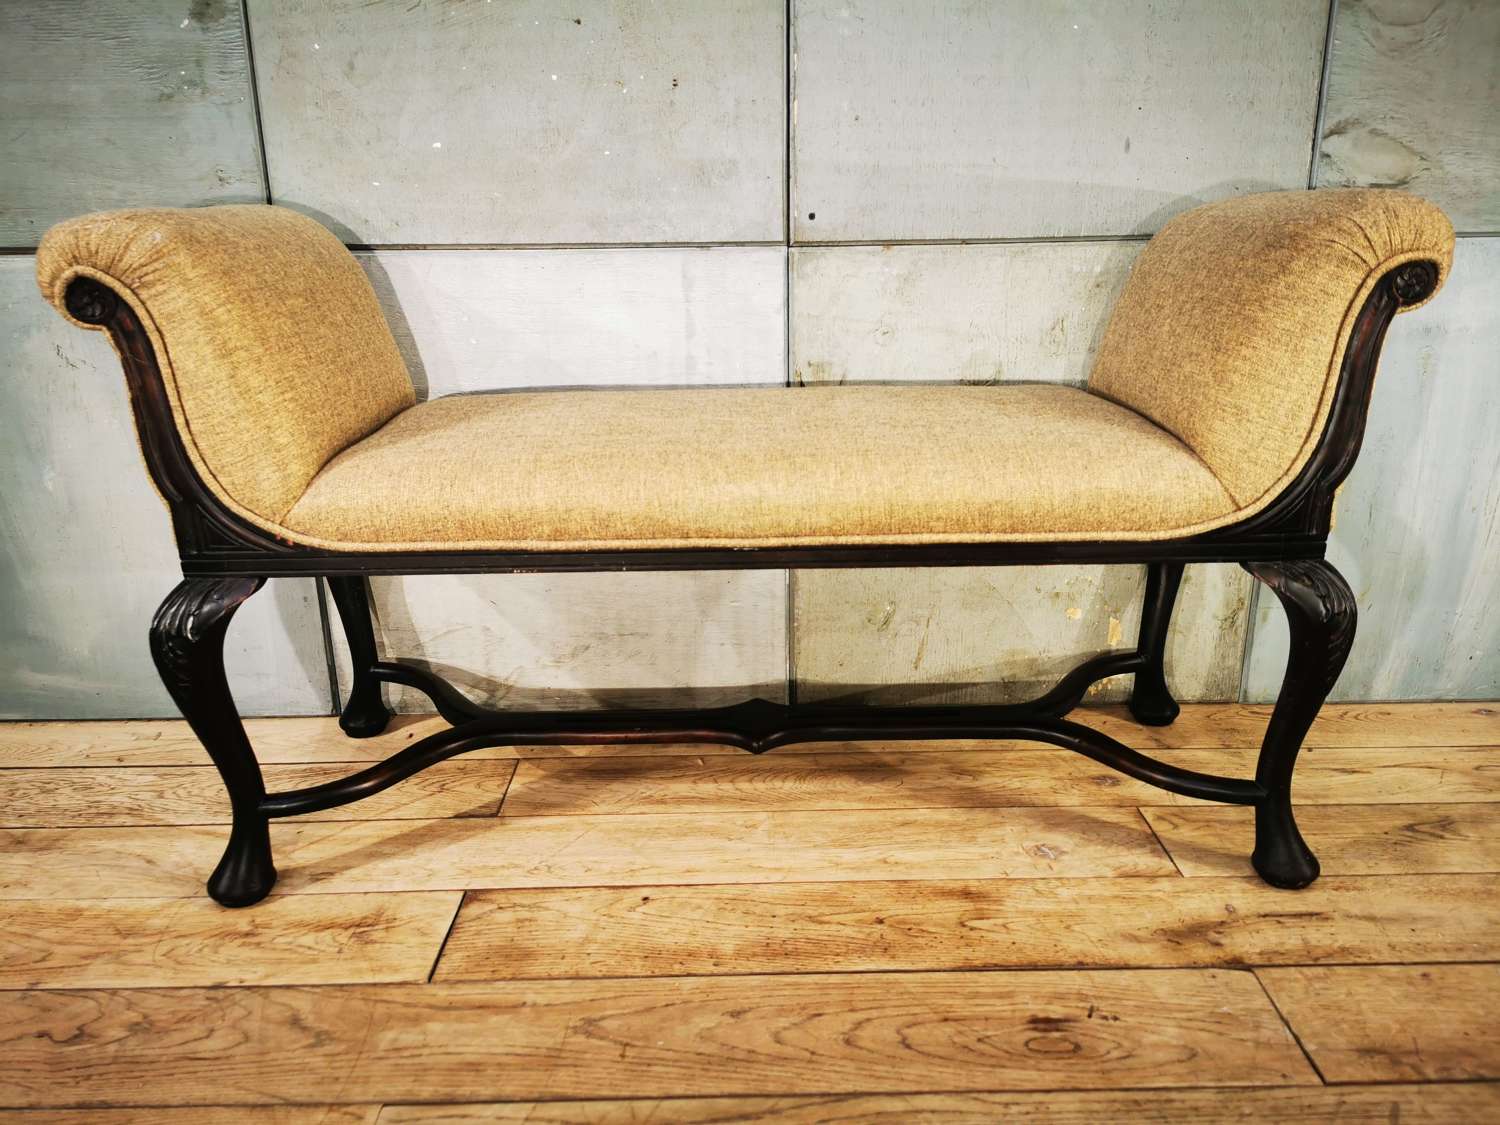 Double sided mahogany window seat from the 19th century